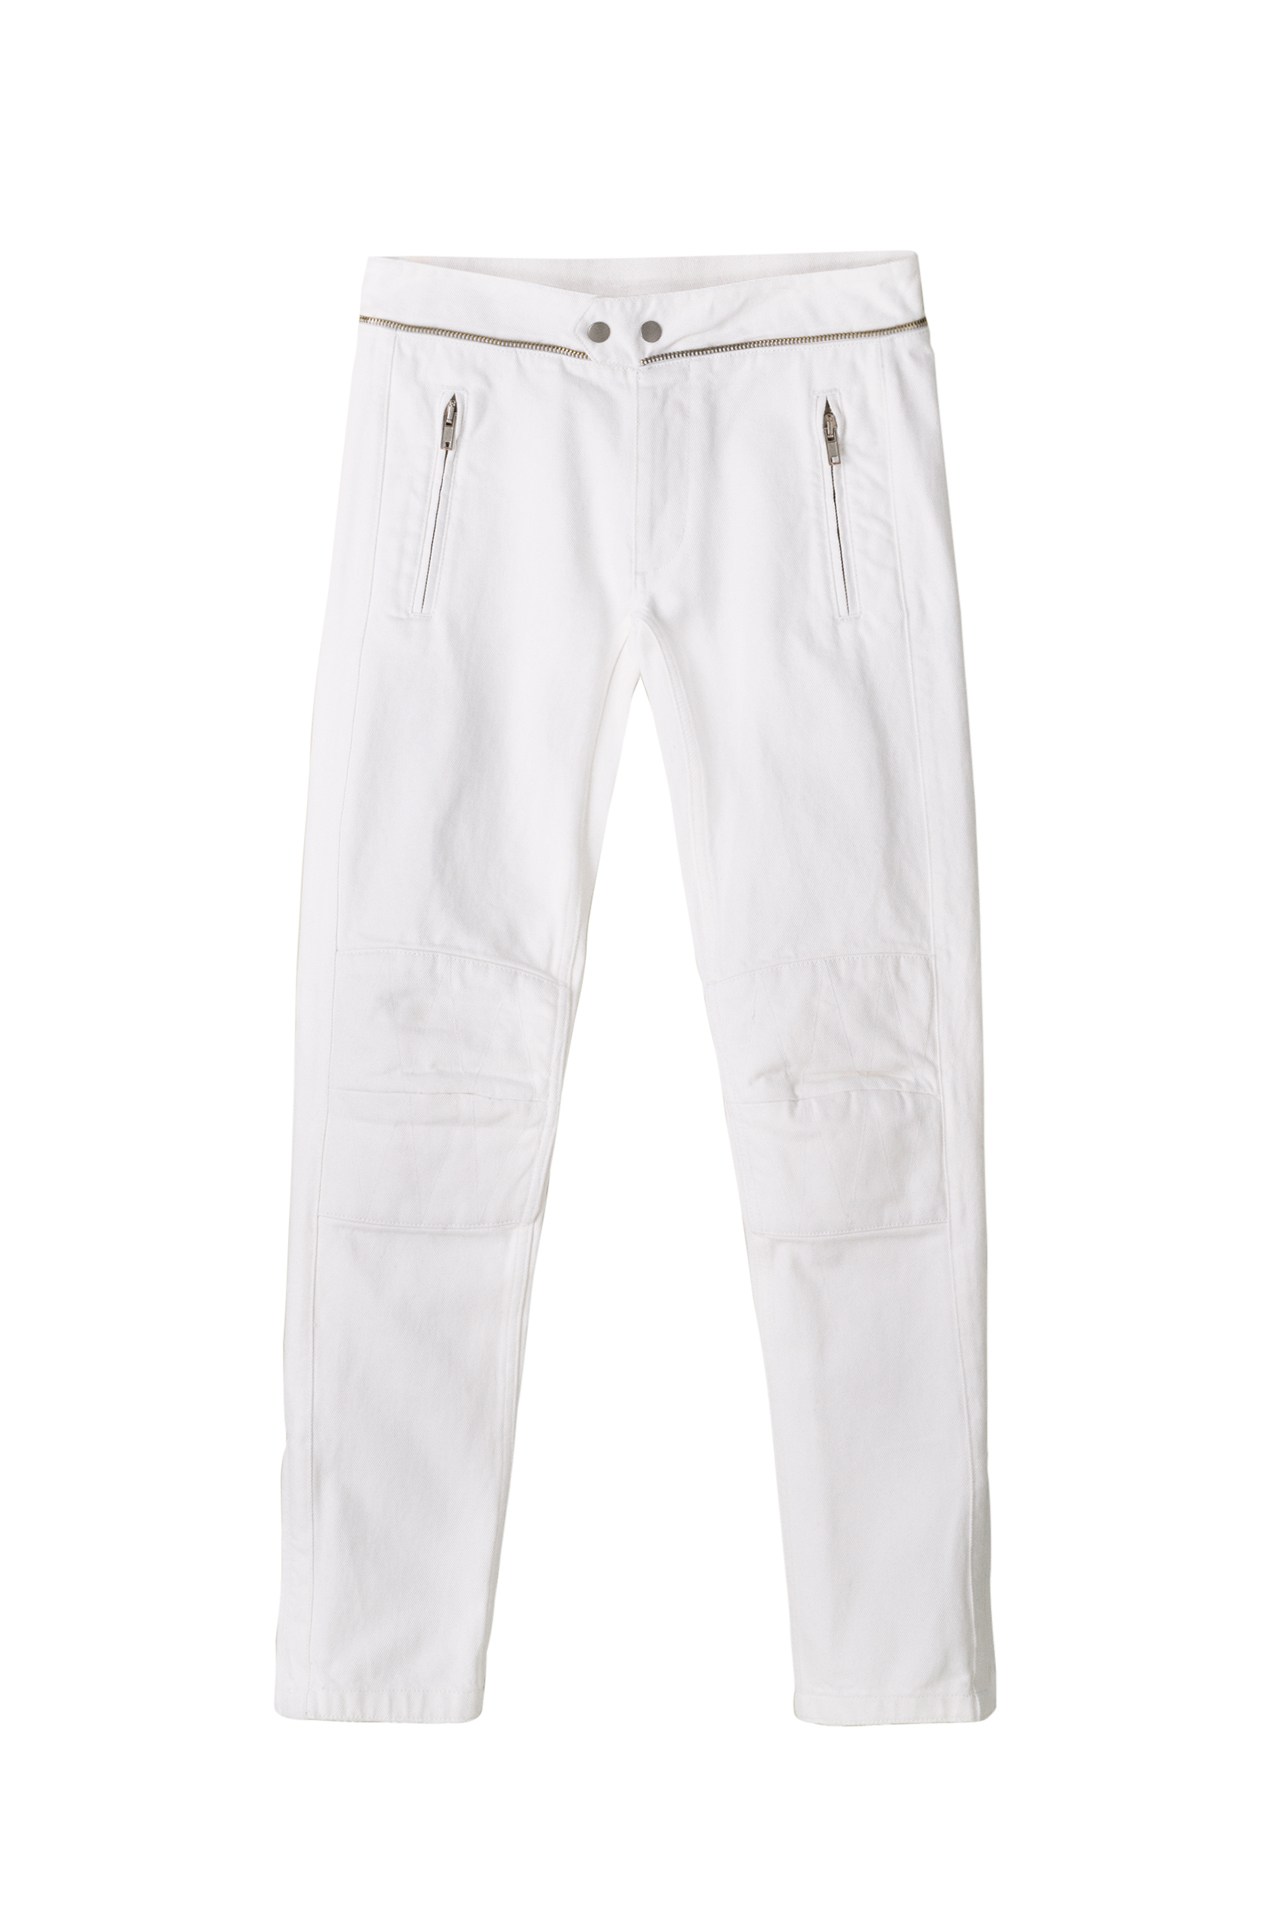 Isabel Marant for H&M – Mens Collection - nitrolicious.com